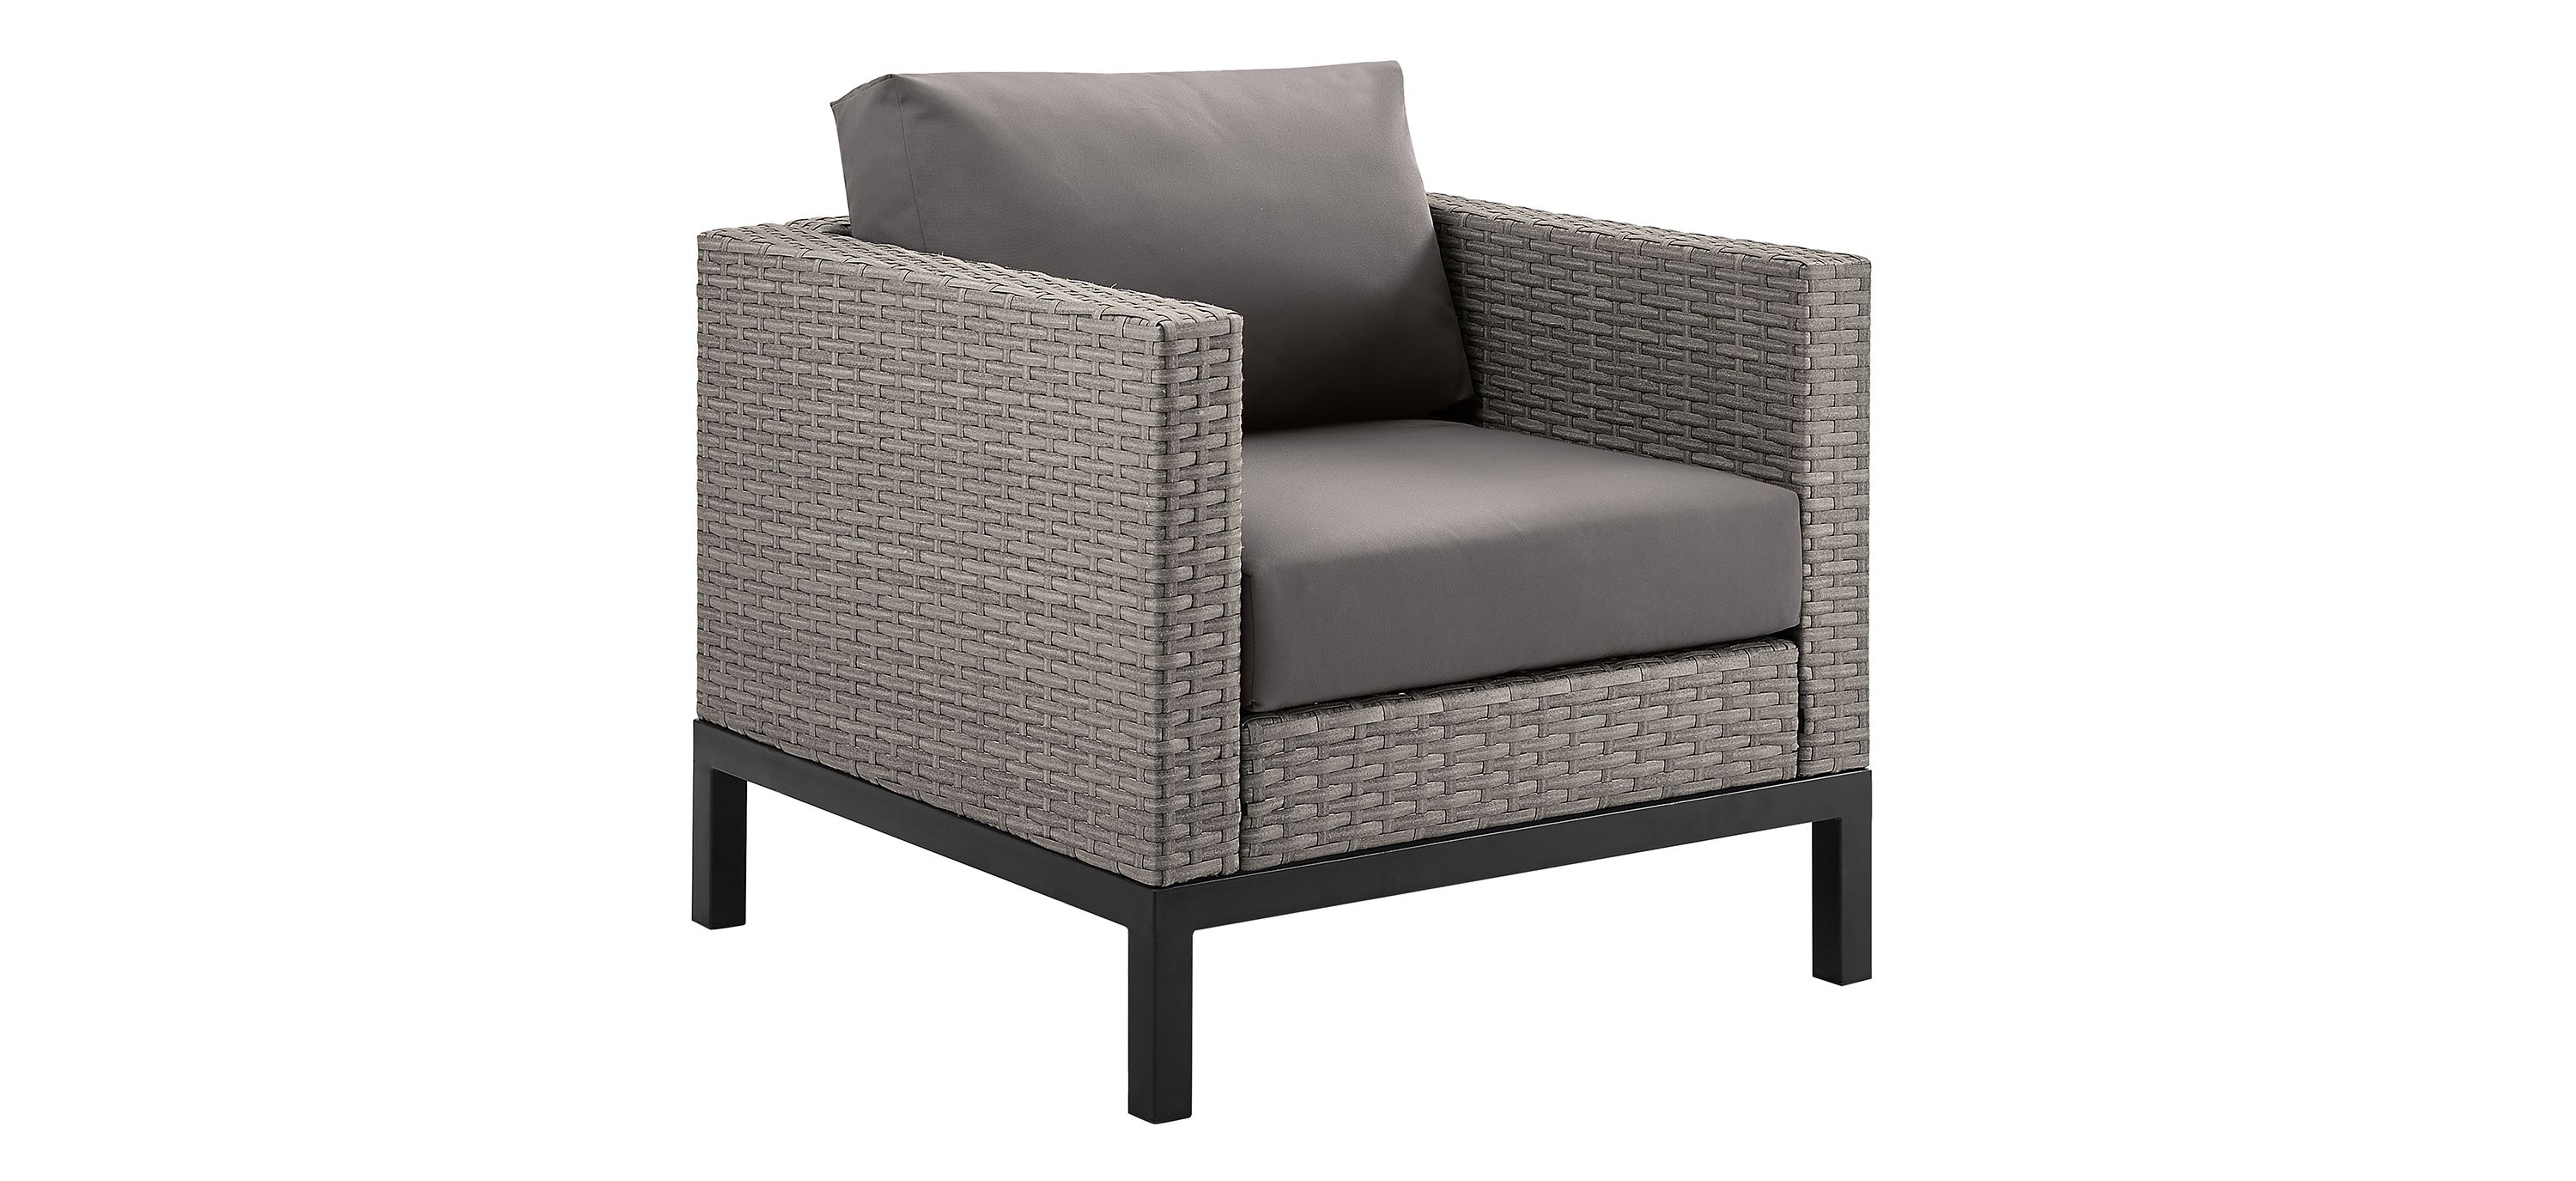 Silas 4-pc. Outdoor Wicker Seating Set with Ottoman